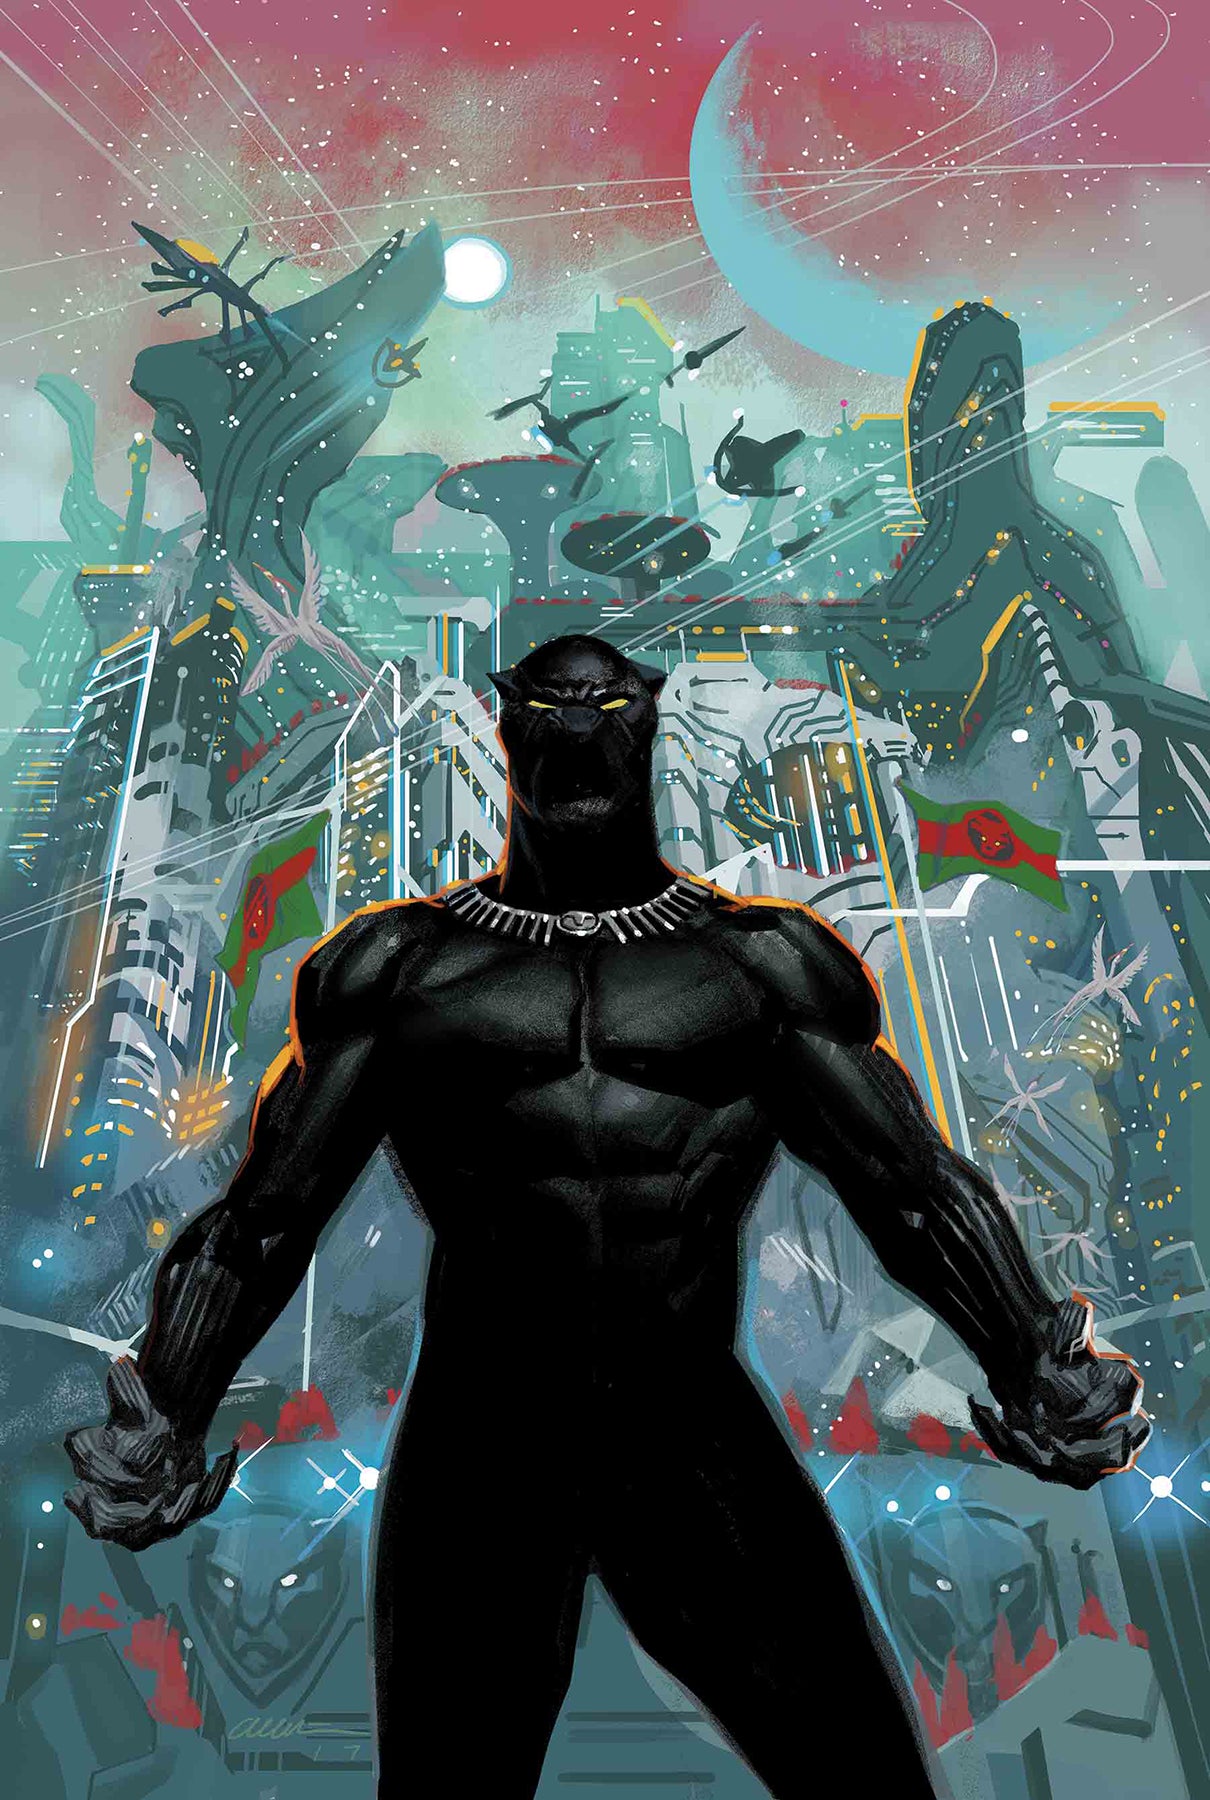 BLACK PANTHER #1 | Game Master's Emporium (The New GME)